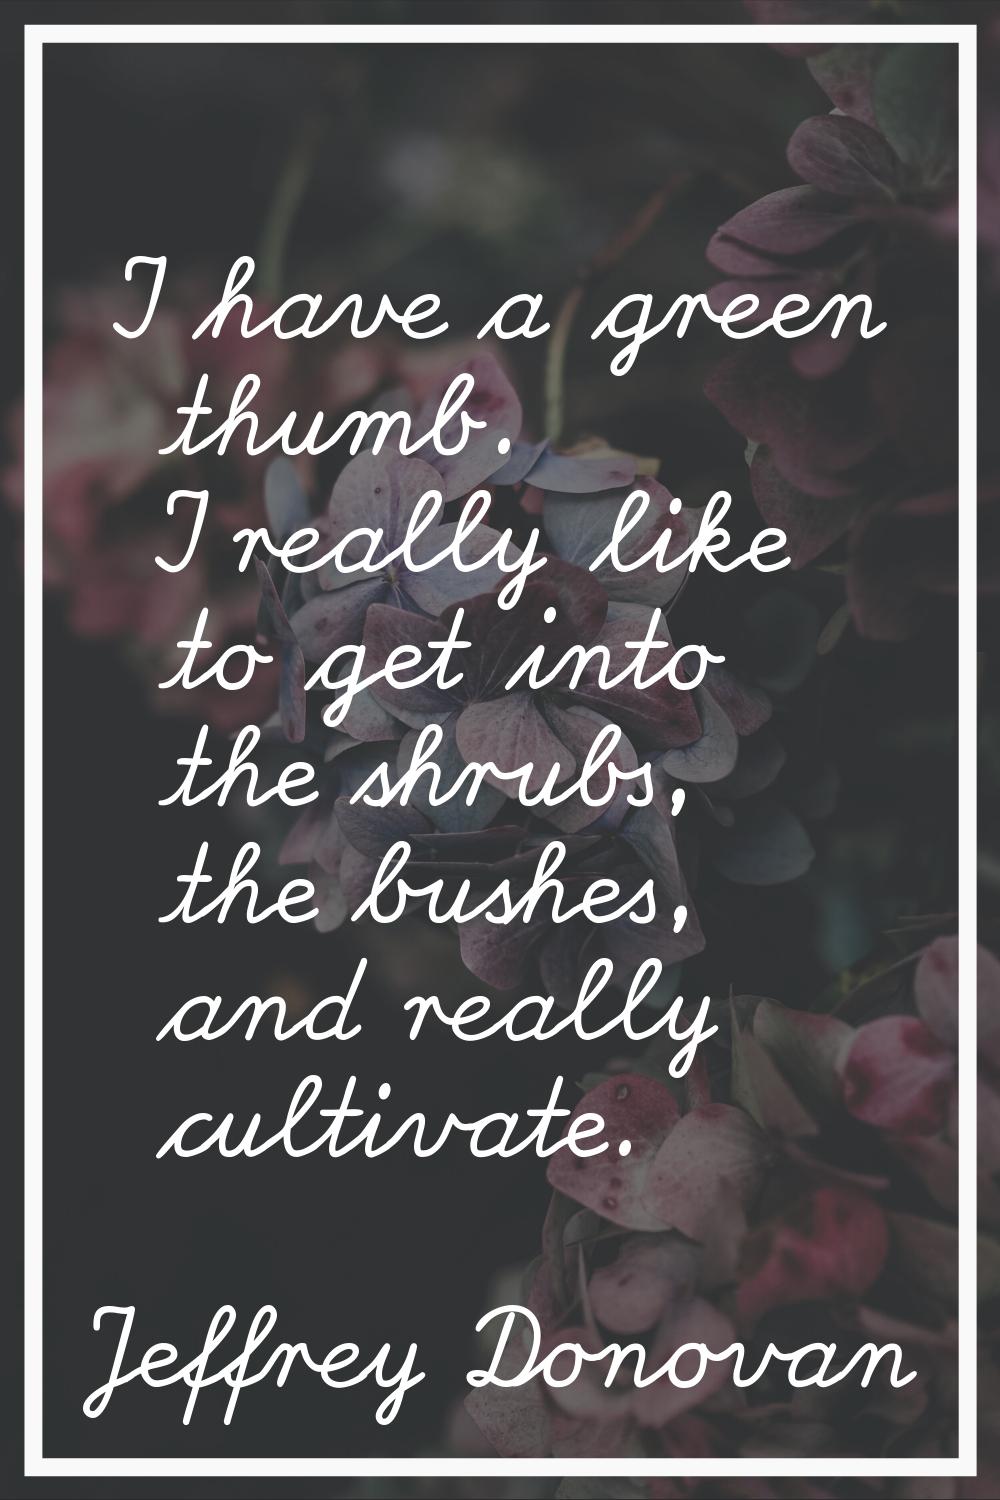 I have a green thumb. I really like to get into the shrubs, the bushes, and really cultivate.